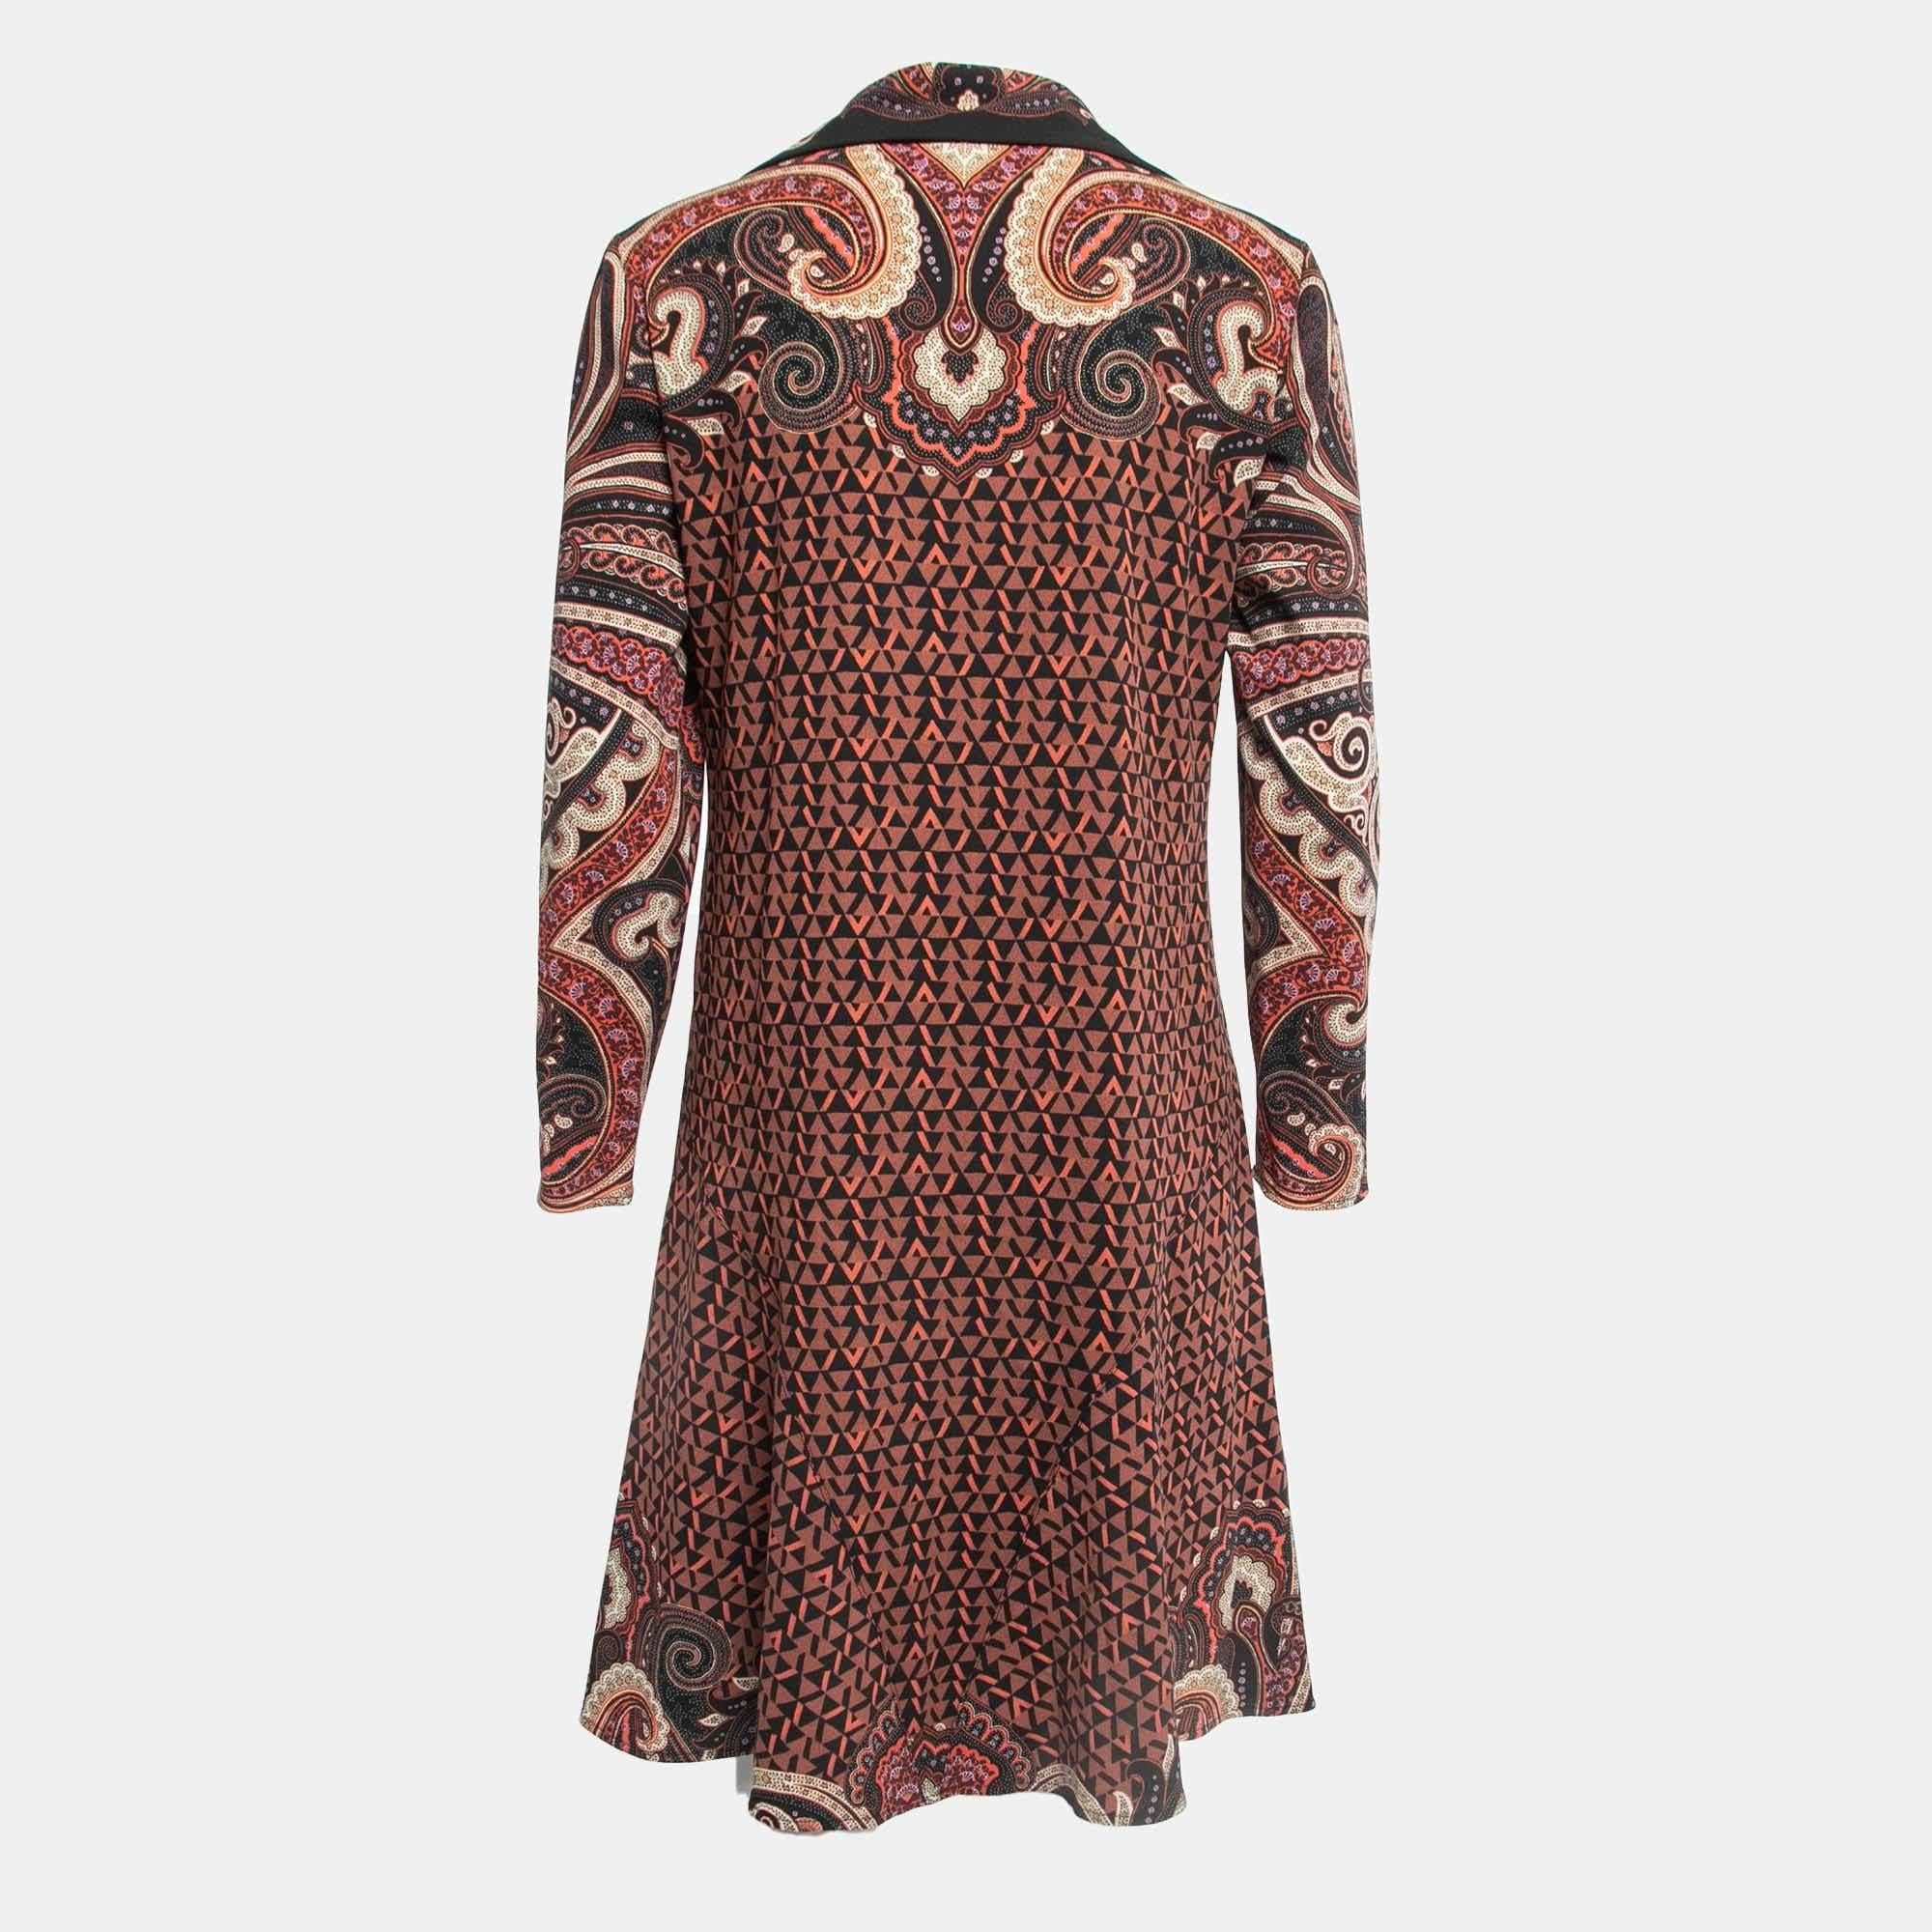 Effortlessly made into a chic design, this Etro short dress is easy to wear and easy to accessorize. Tailored beautifully, the dress is sure to remain a favorite season after season.

